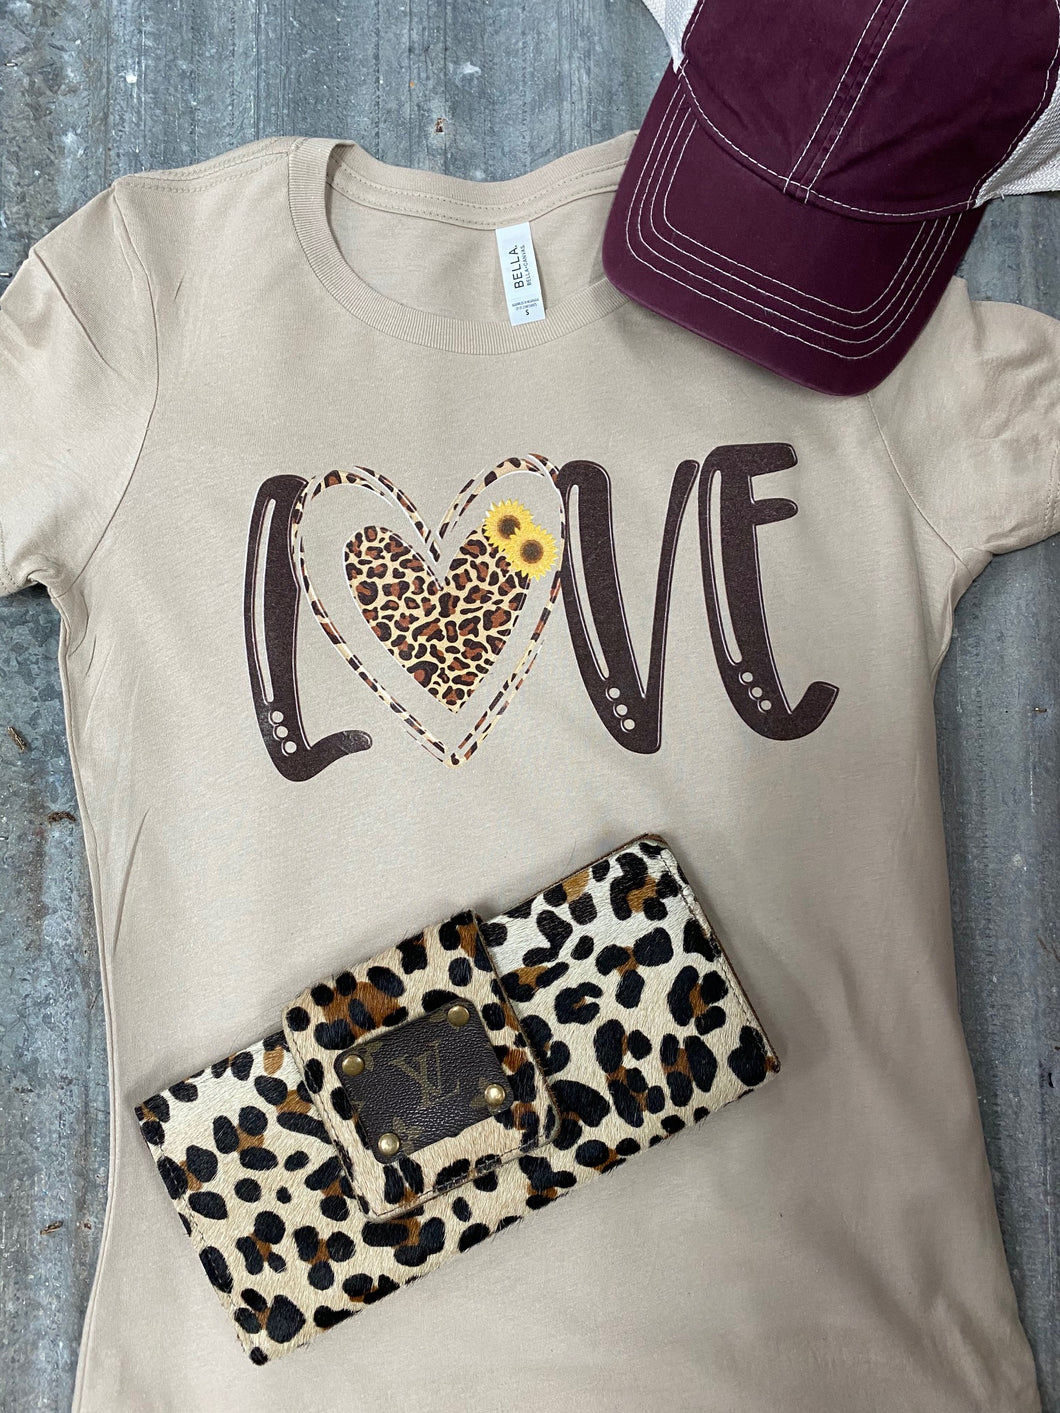 LOVE. Heart, Cheetah & Sunflowers.  Is there really any other options?